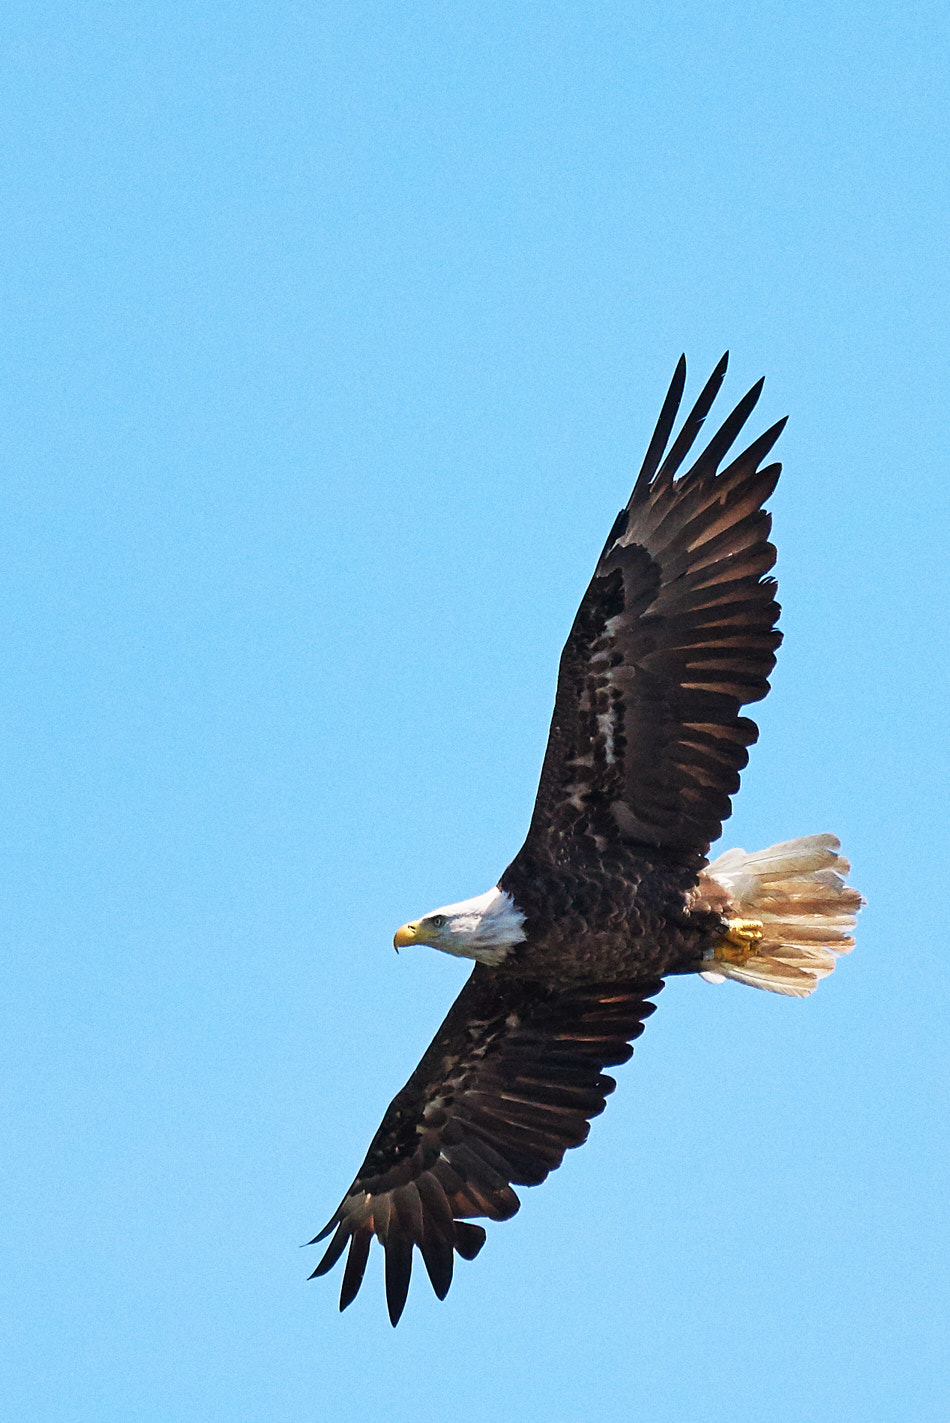 An adult bald eagle flies high over the Connecticut River